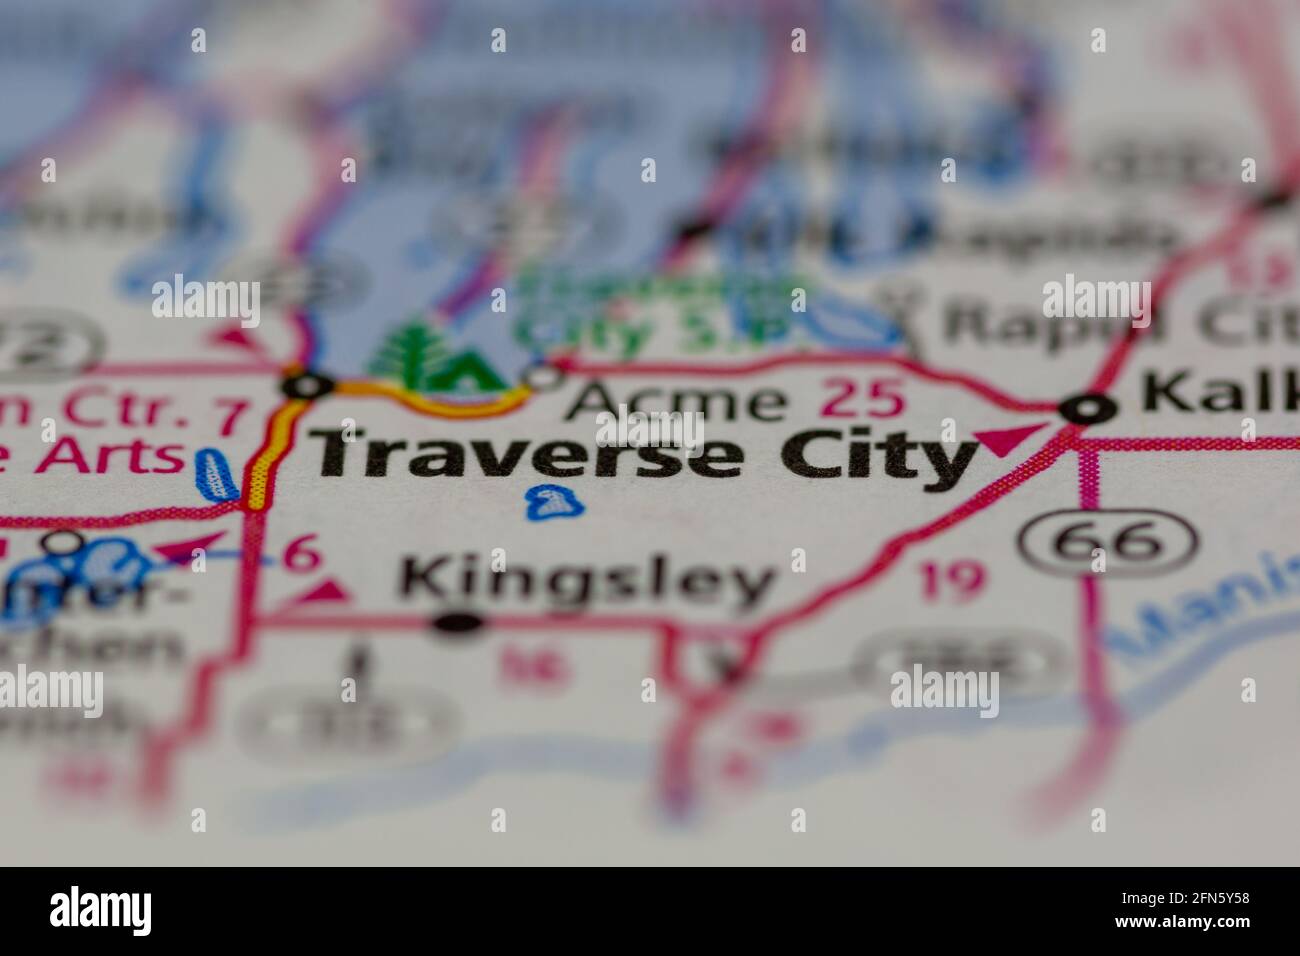 Traverse City Michigan USA shown on a Geography map or road map Stock Photo